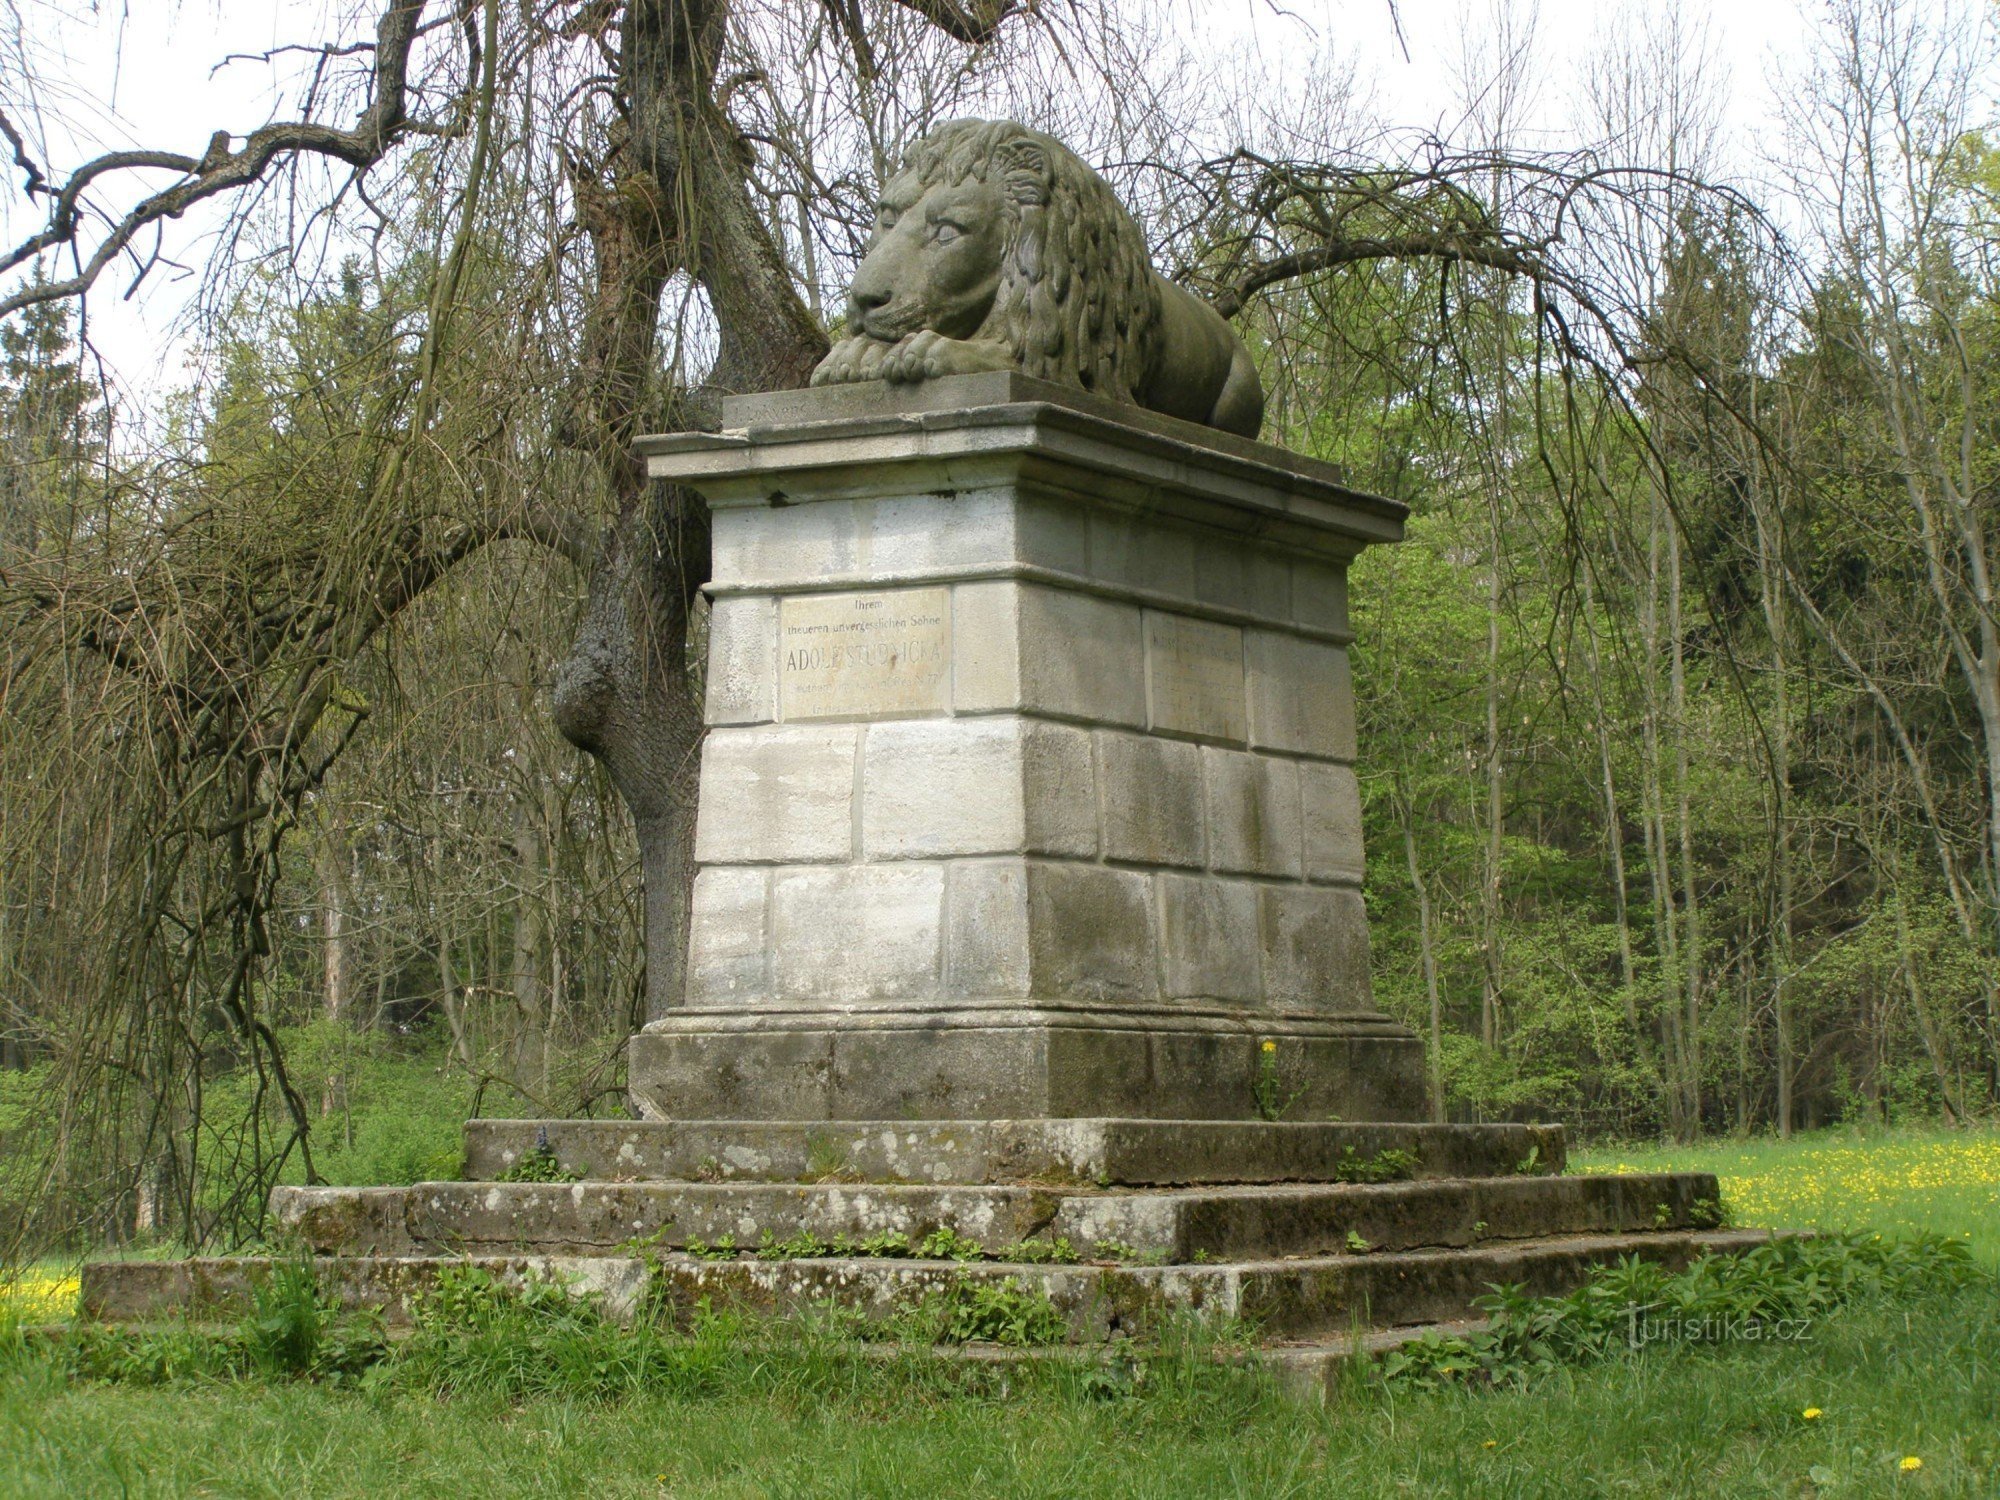 Dubno - monument to the battle of 1866, Sleeping lion